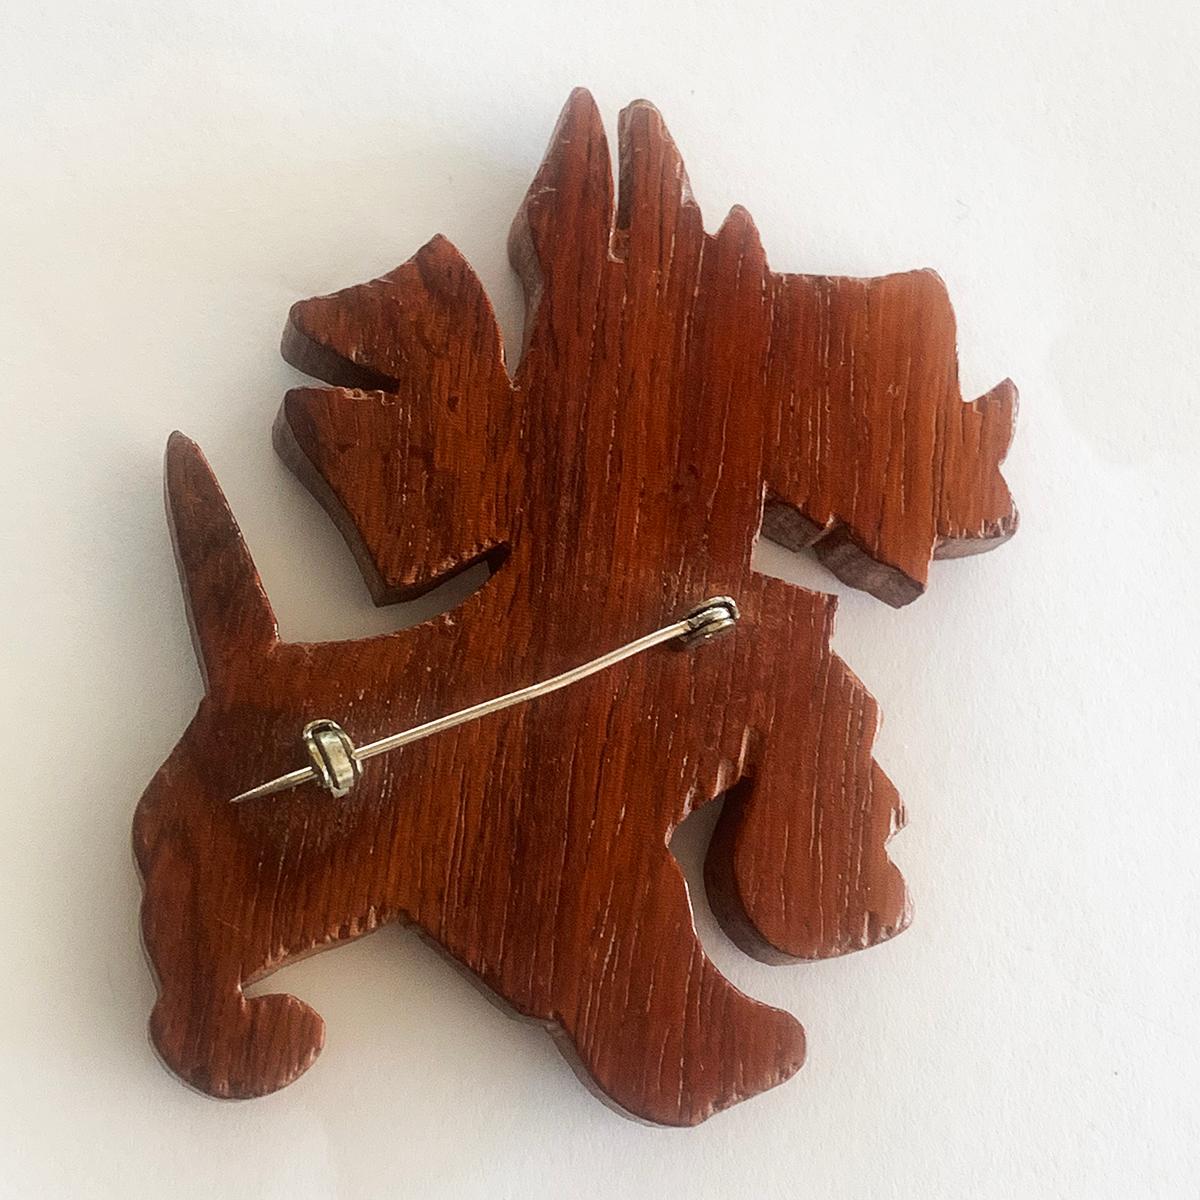 Art Deco wooden Terrier Dog brooch pin In Good Condition For Sale In Daylesford, Victoria